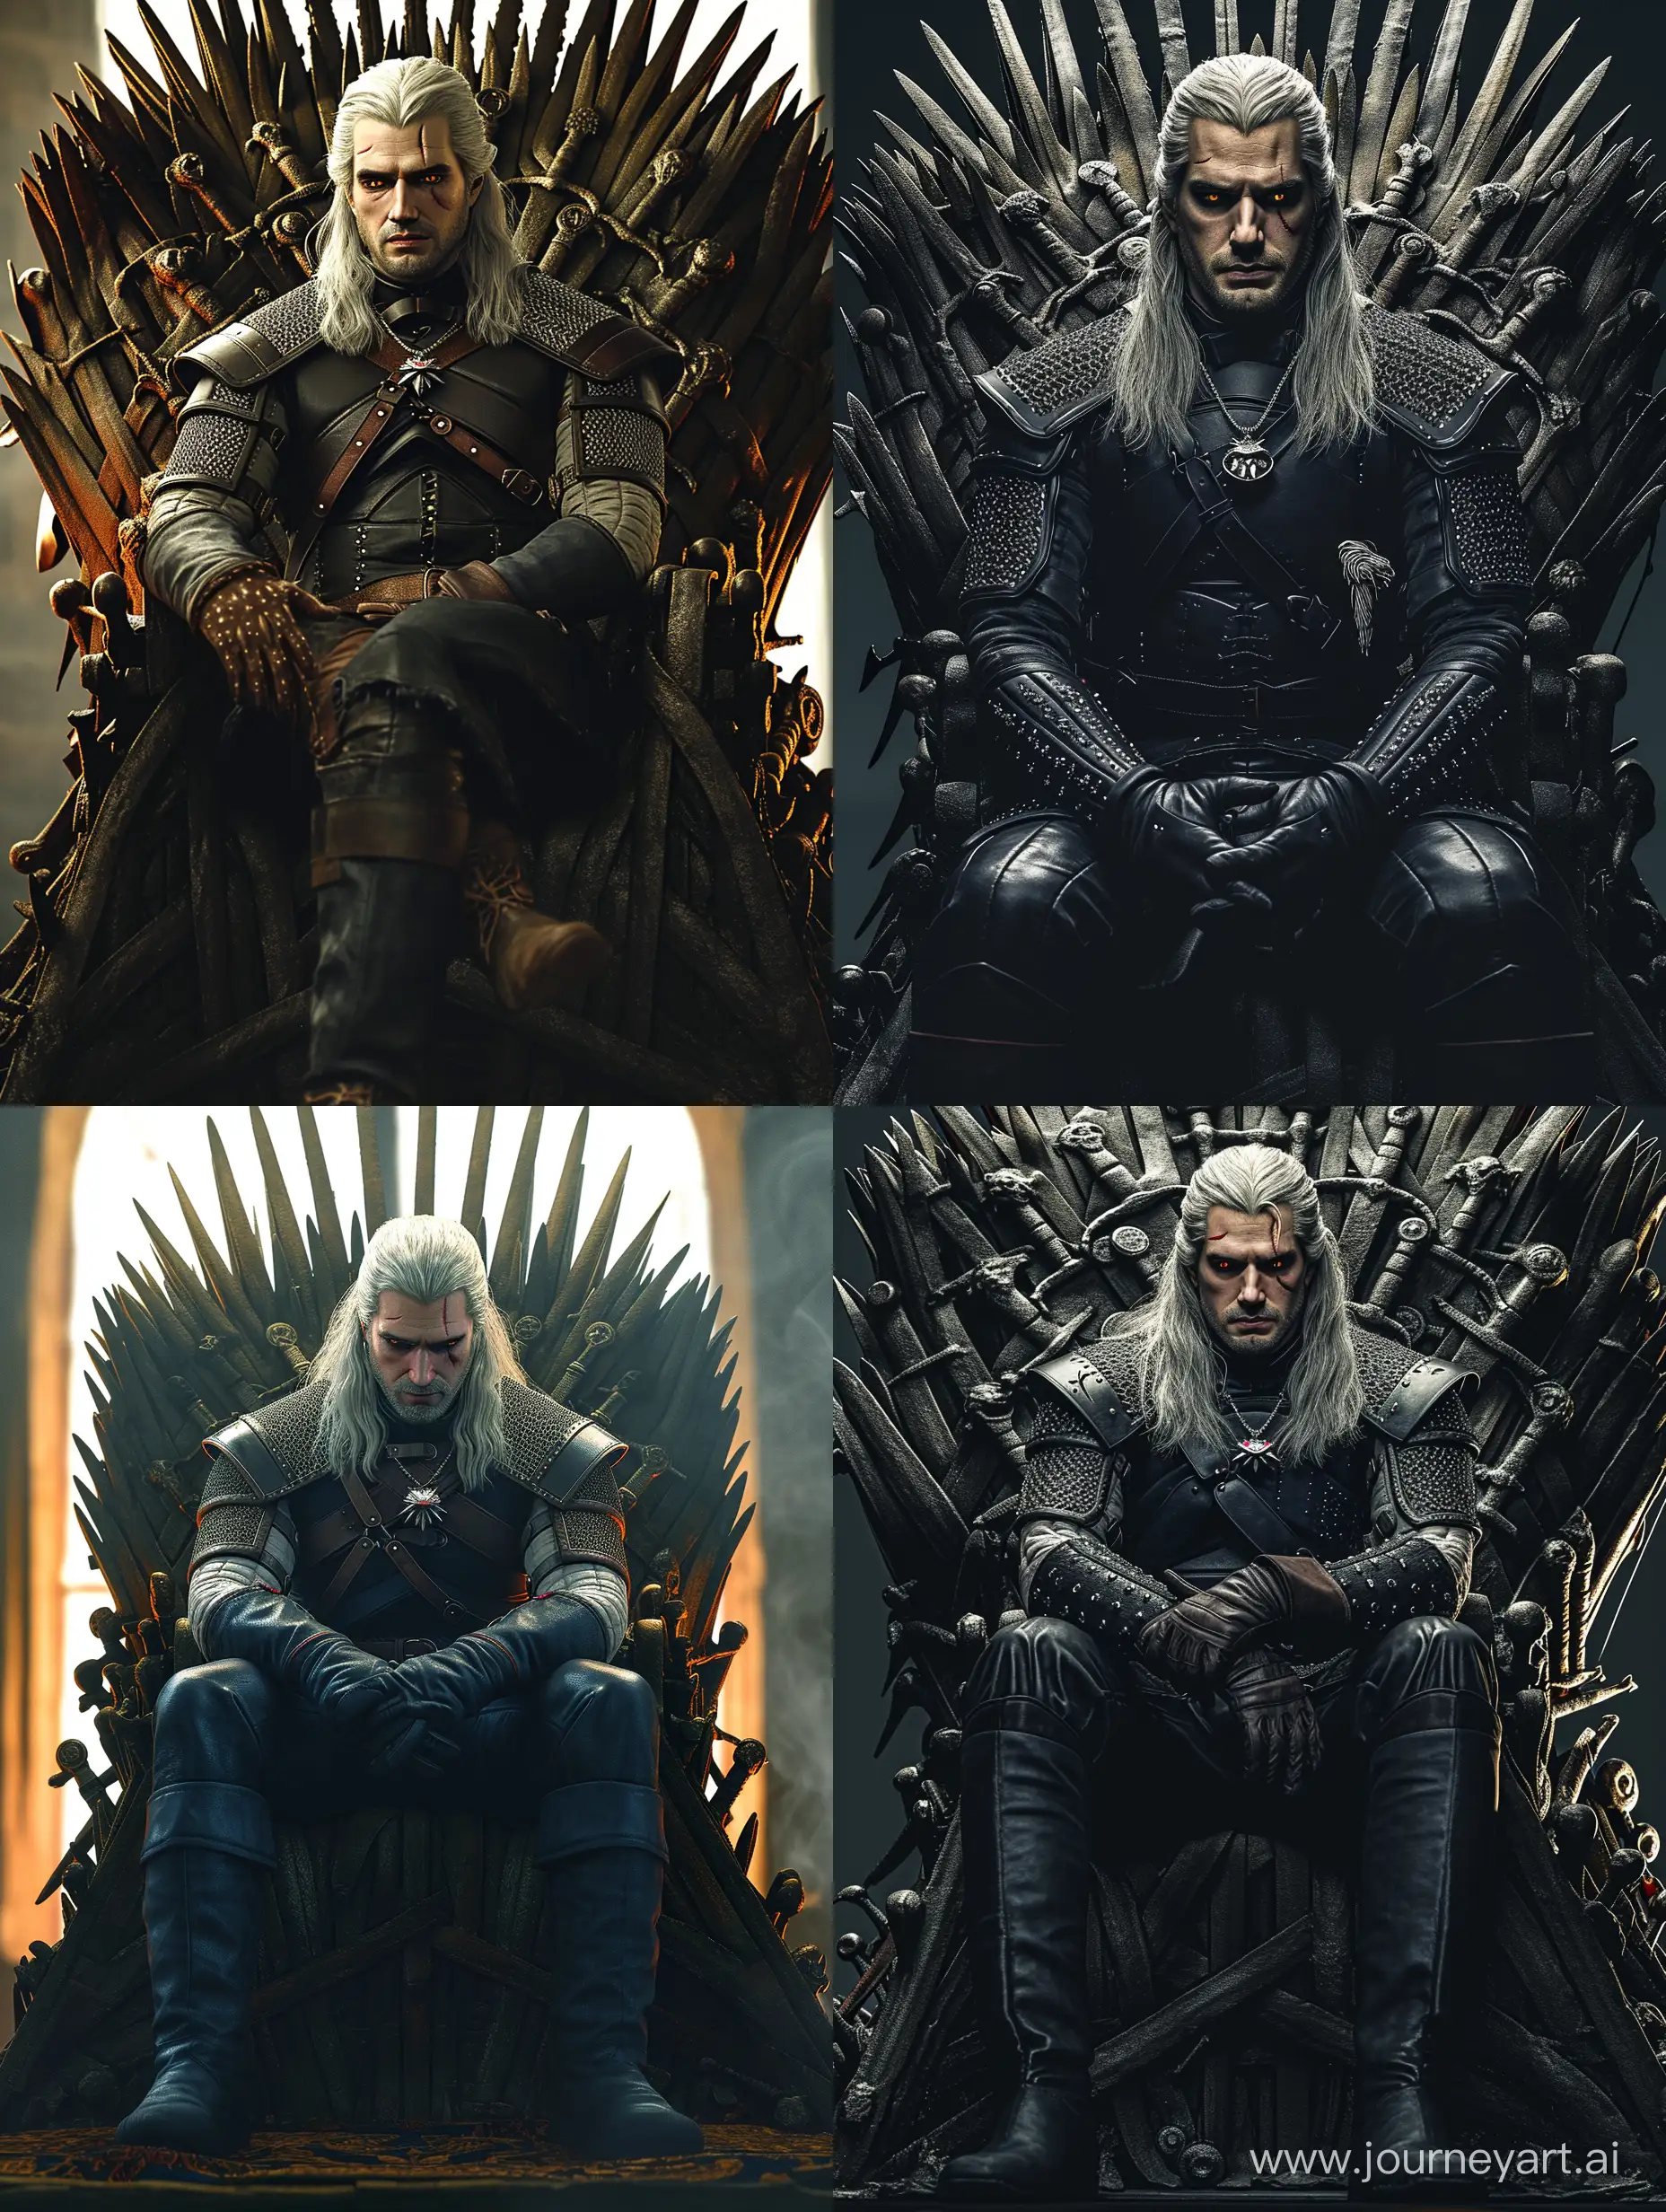 Henry-Cavill-as-Geralt-of-Rivia-on-the-Game-of-Thrones-Throne